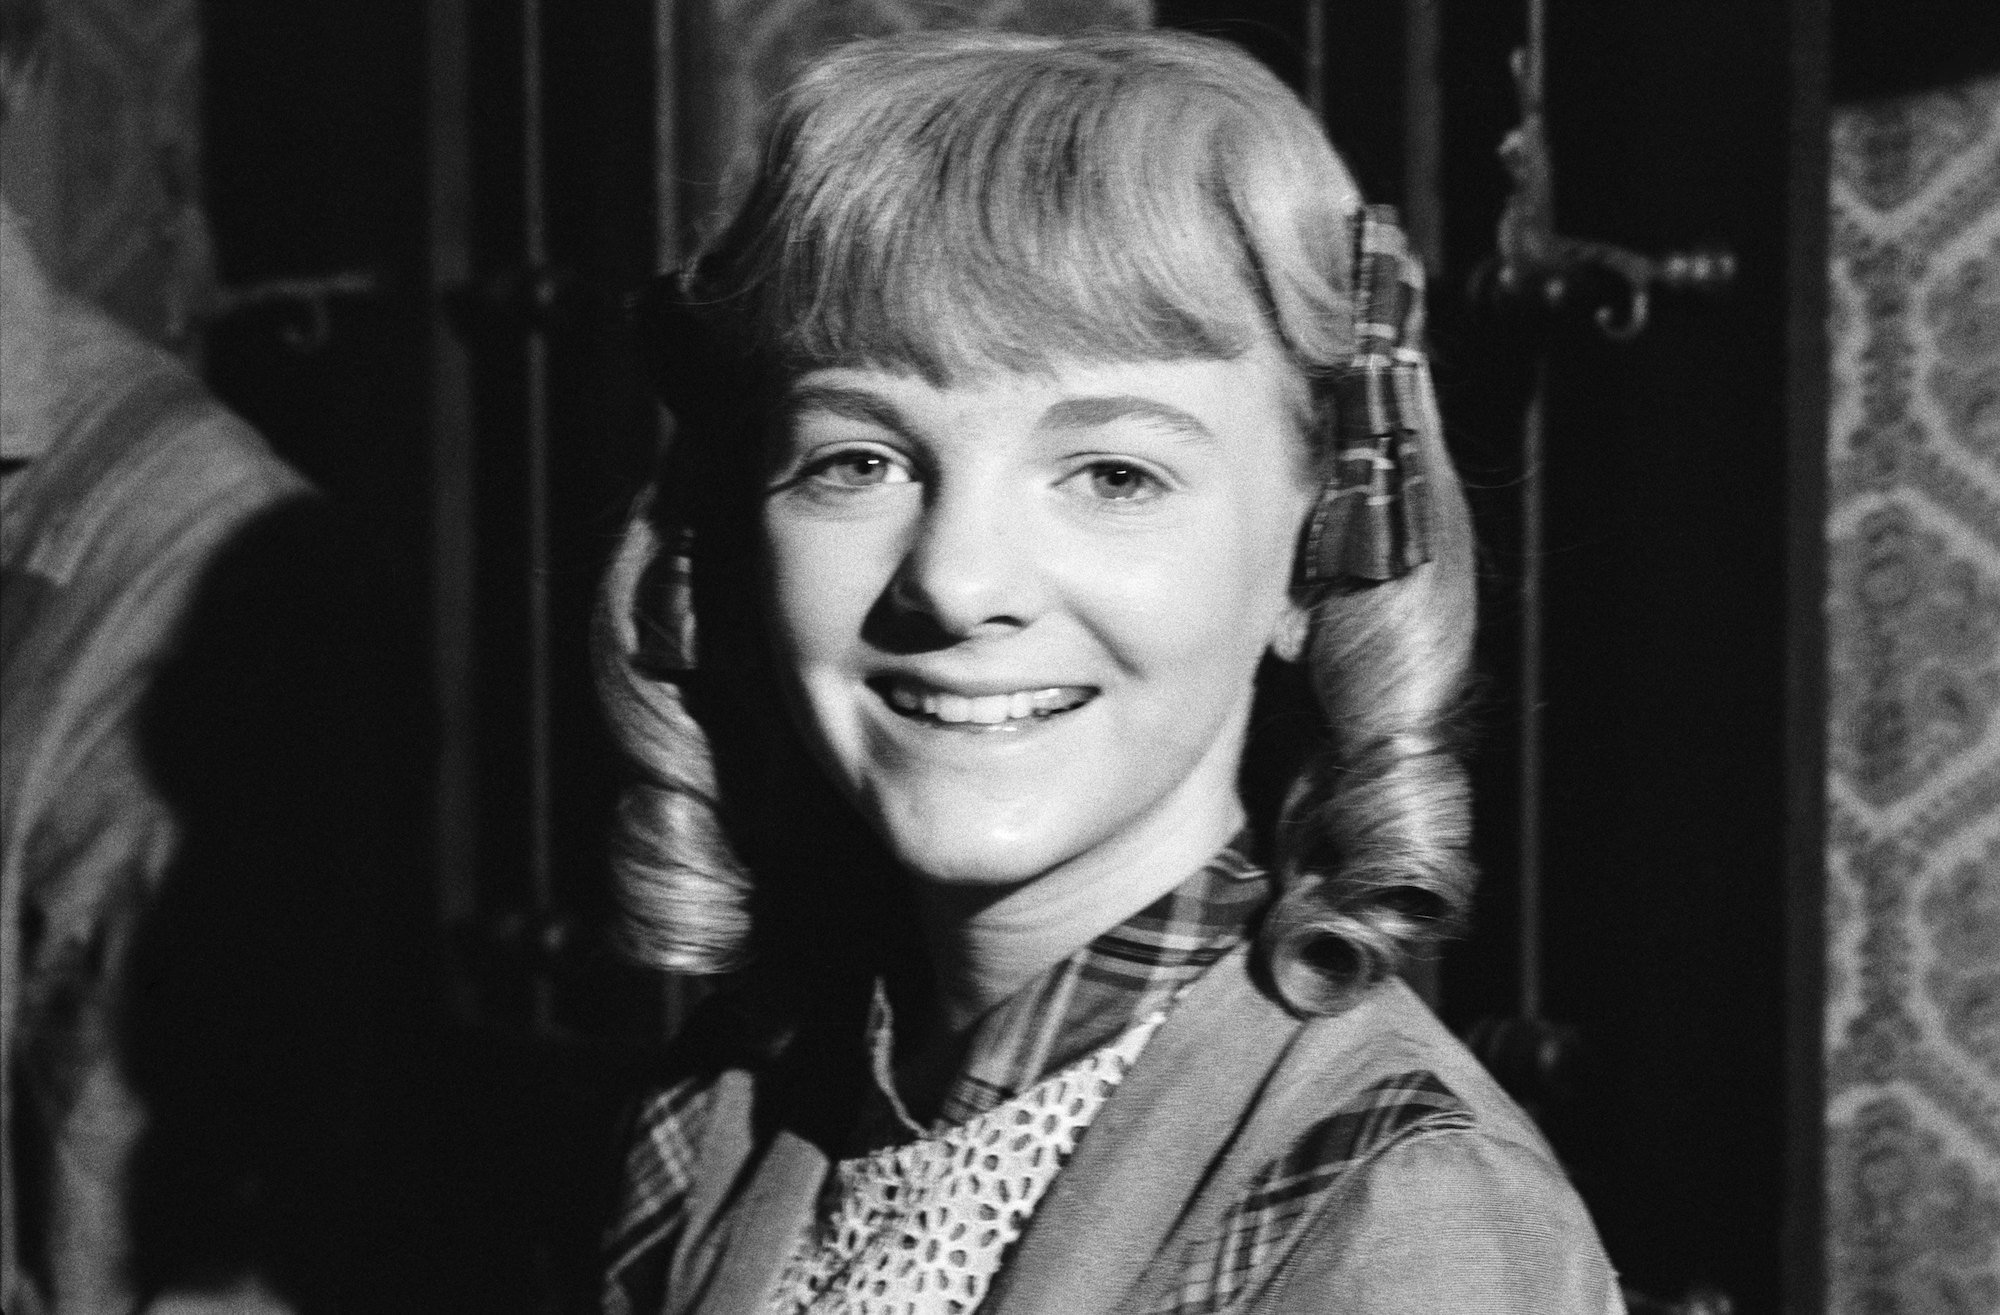 (L-R) Alison Arngrim as Nellie Oleson smiling, in black and white